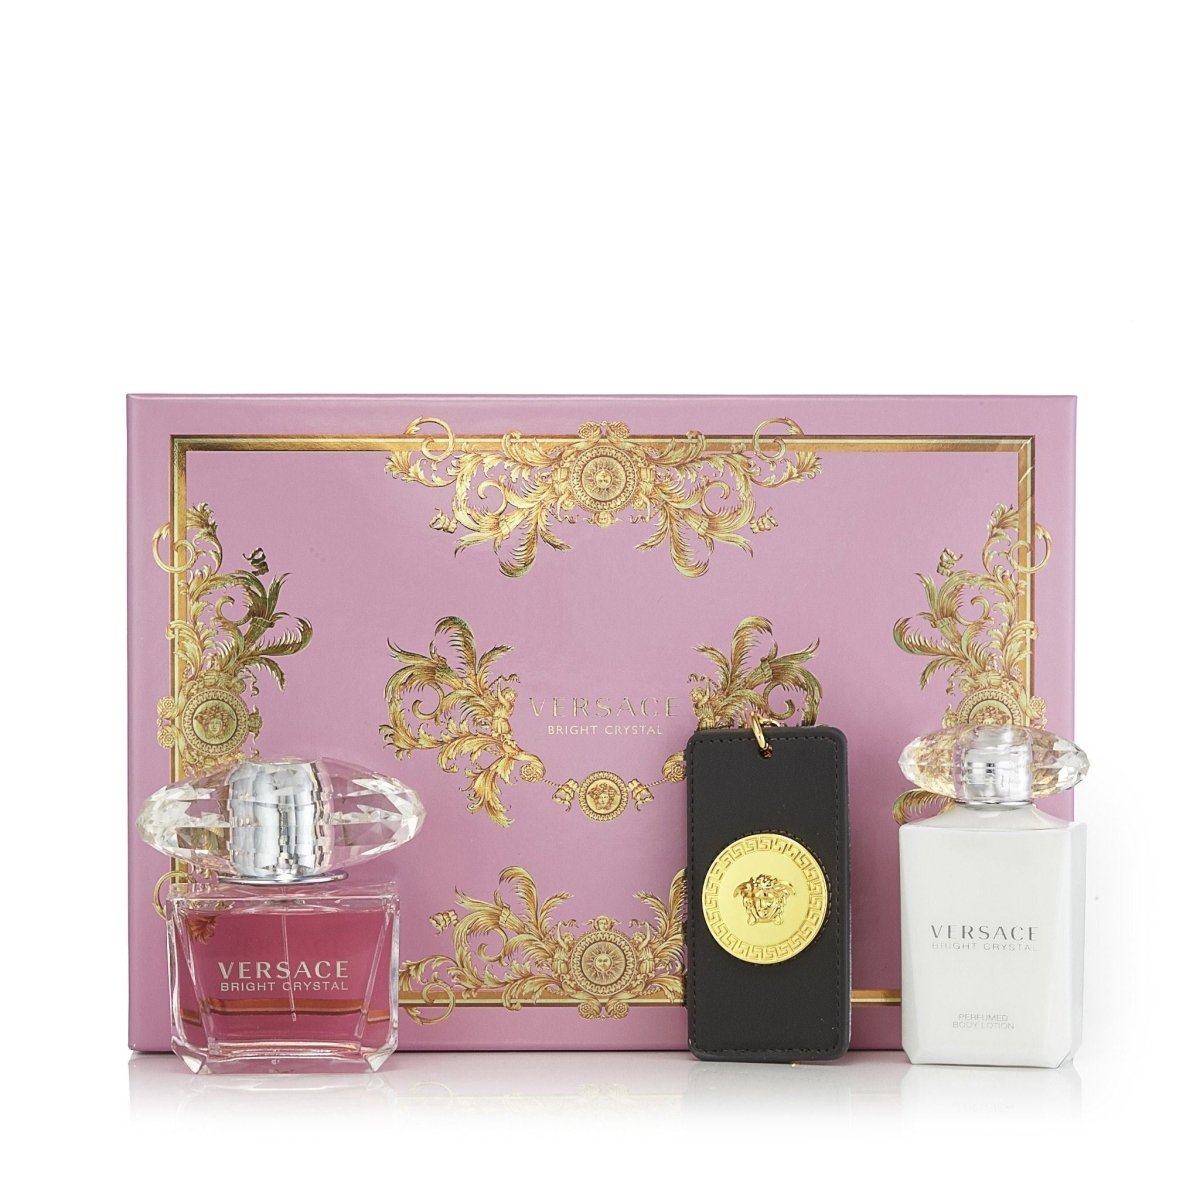 Bright Crystal Set for Women by Versace